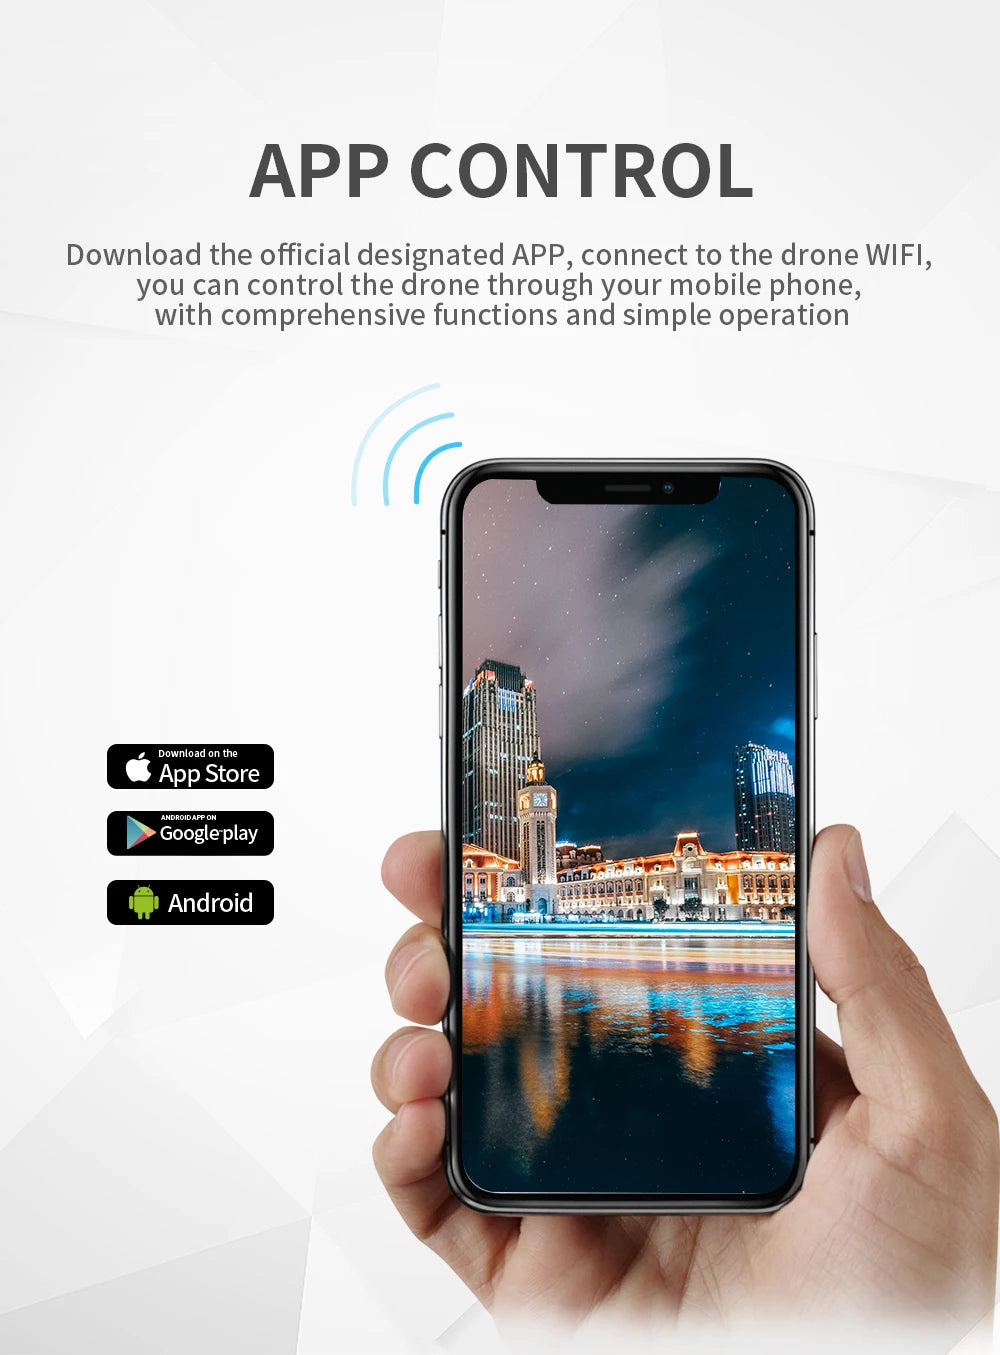 ZLRC SG108 Drone, Download the official designated APP, connect to the drone WIFI, you can control the drone